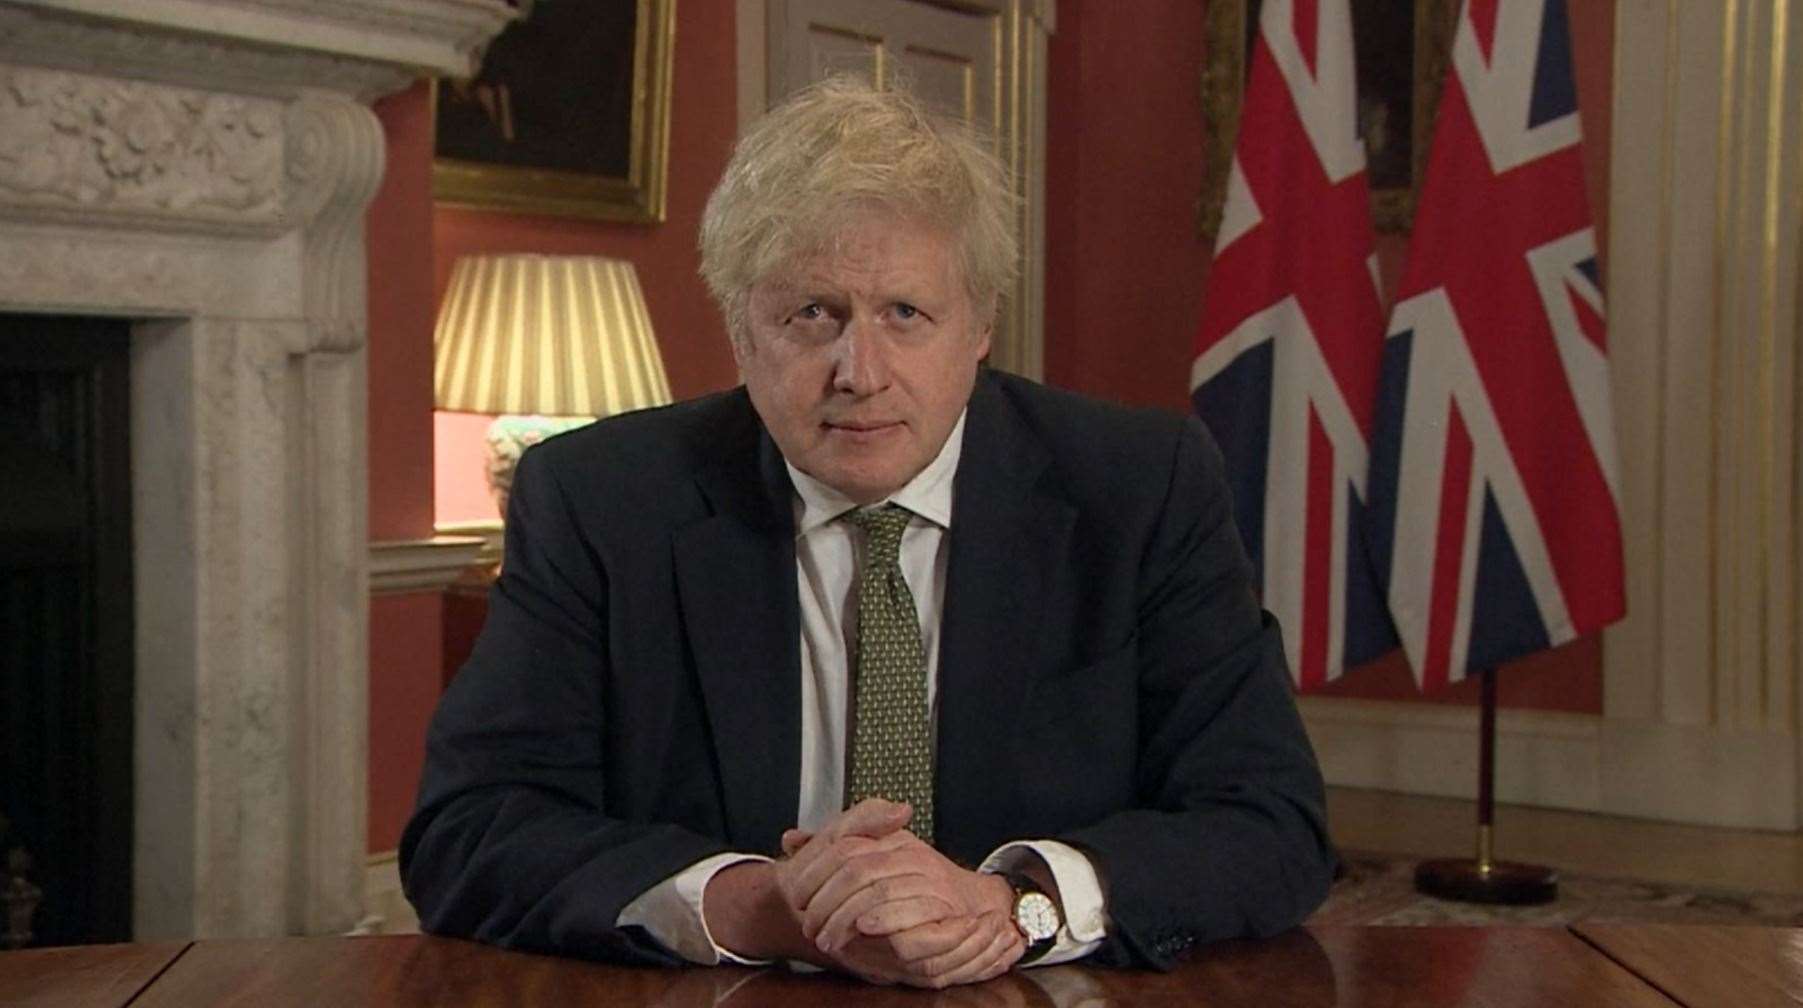 Prime Minister Boris Johnson has warned the new variant of Covid-19 may be associated with 'a higher degree of mortality'.